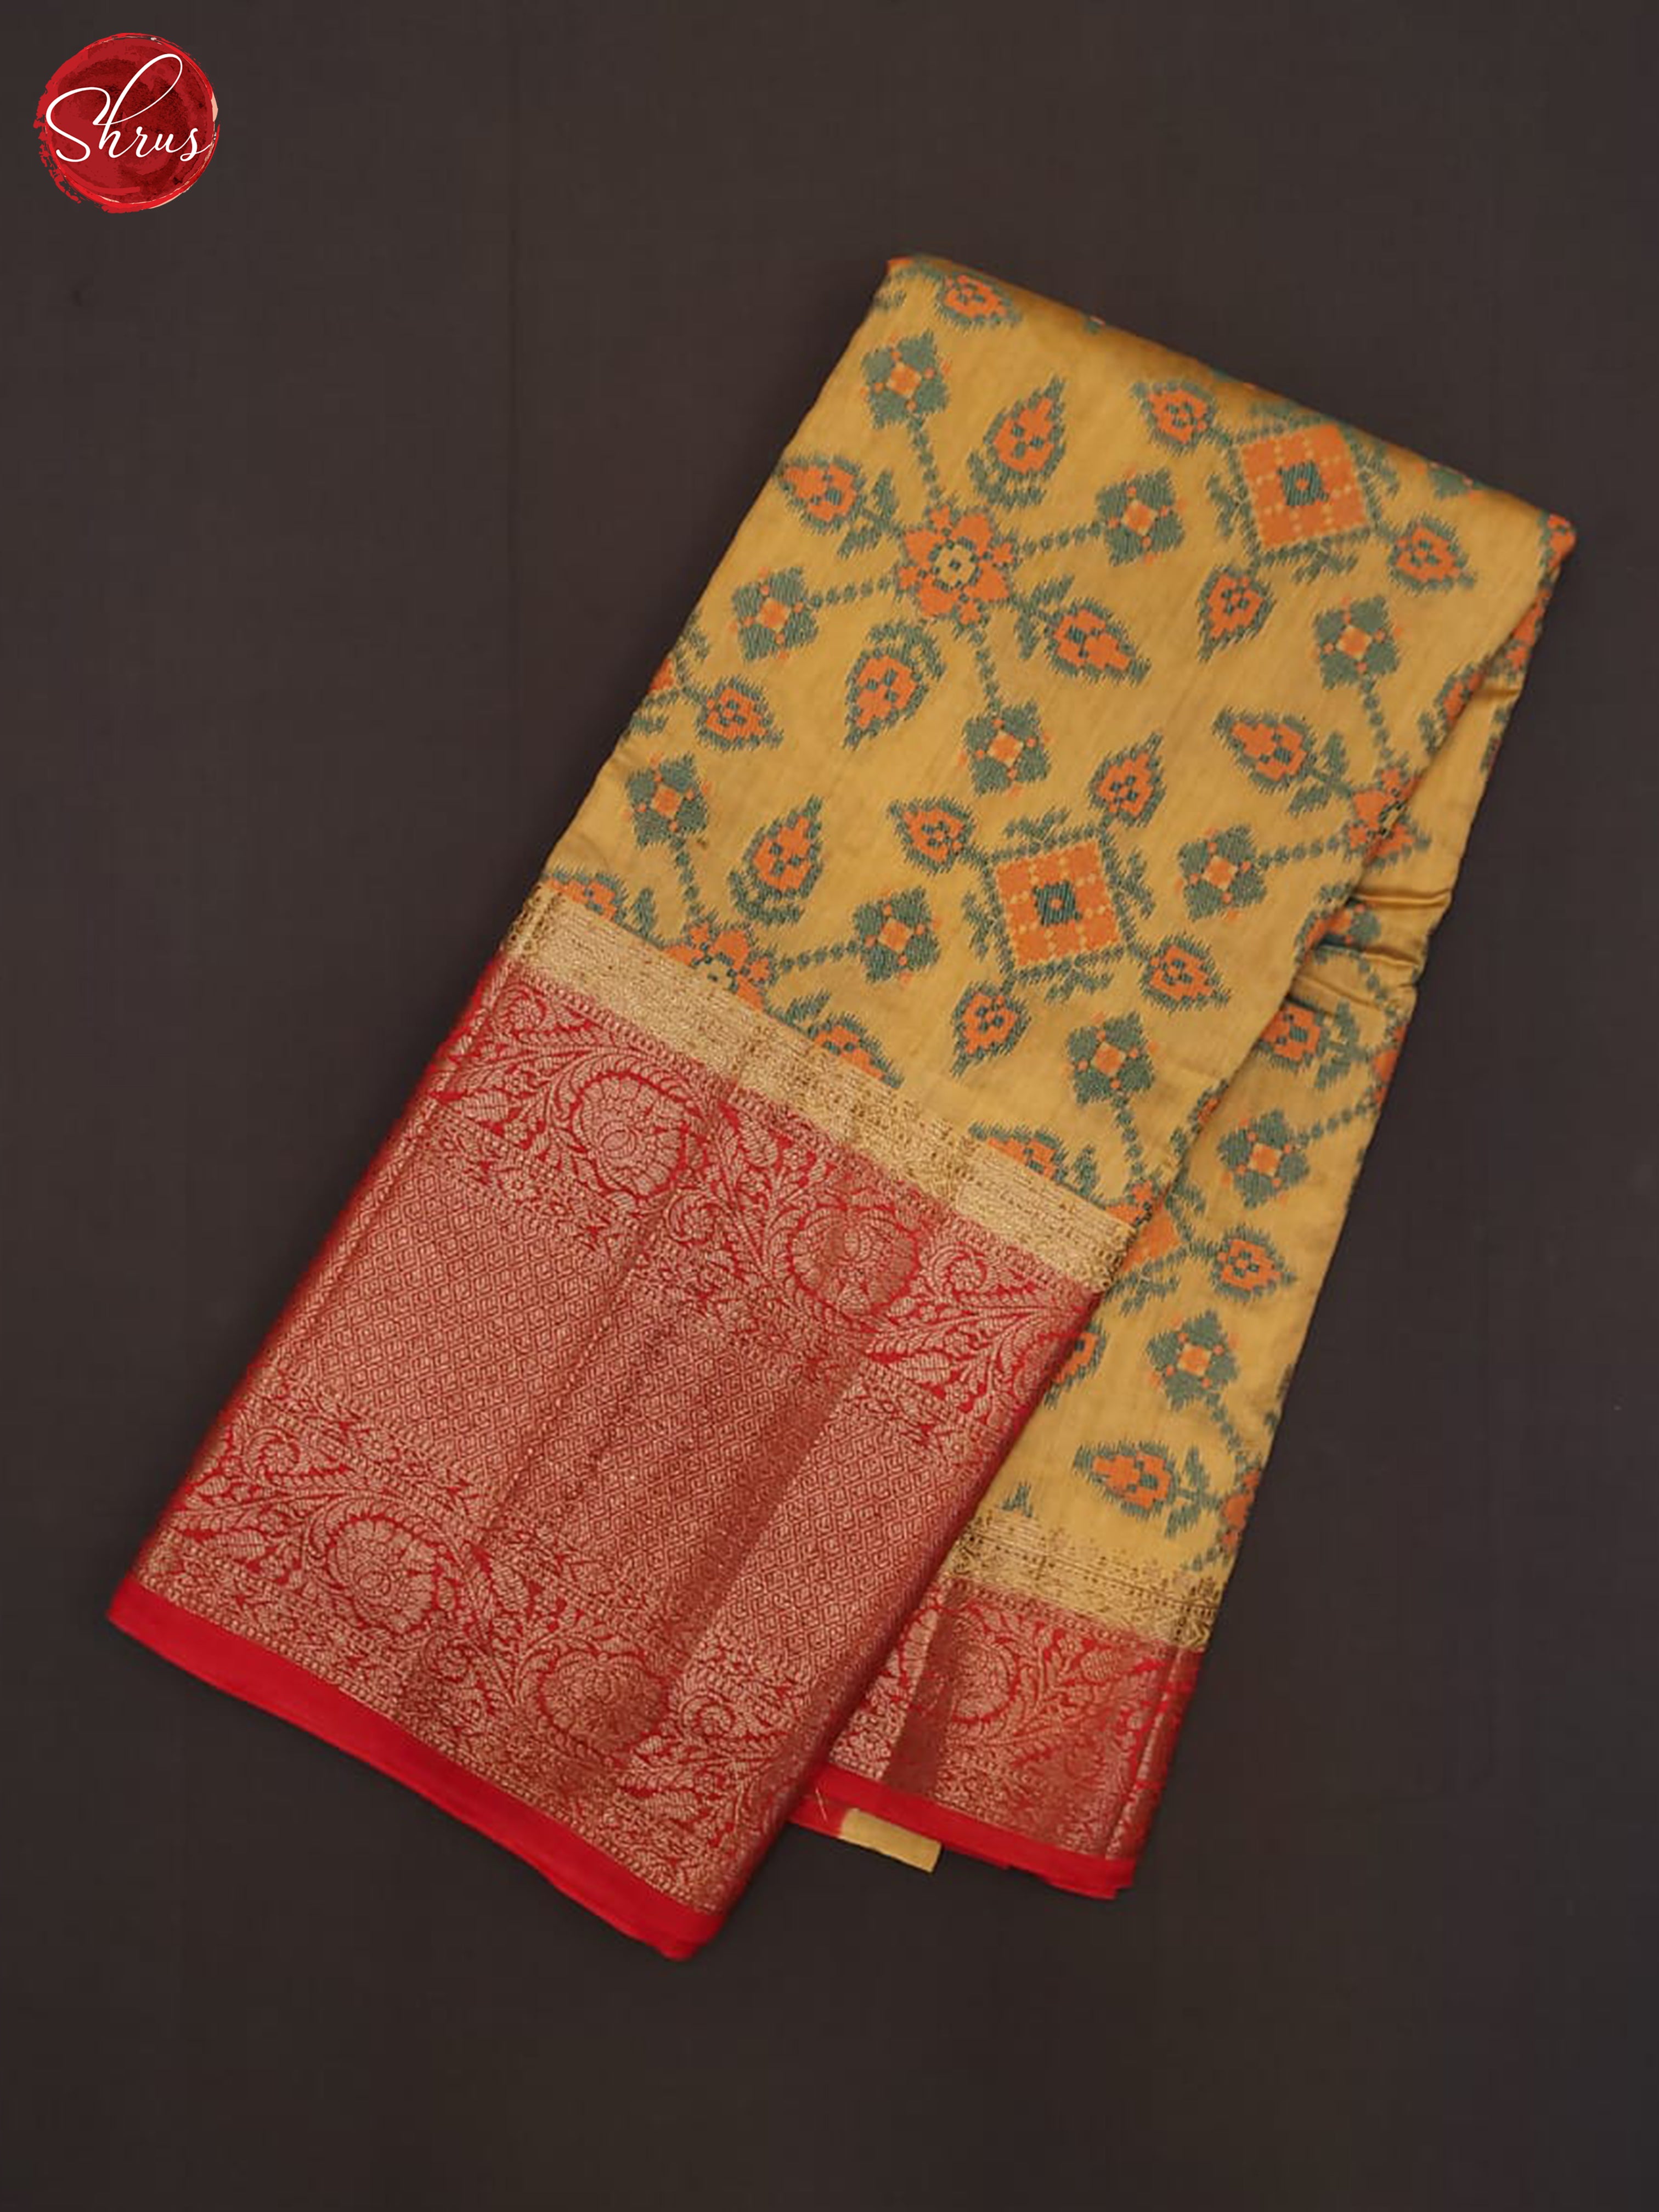 beige and Red-Tussar saree - Shop on ShrusEternity.com